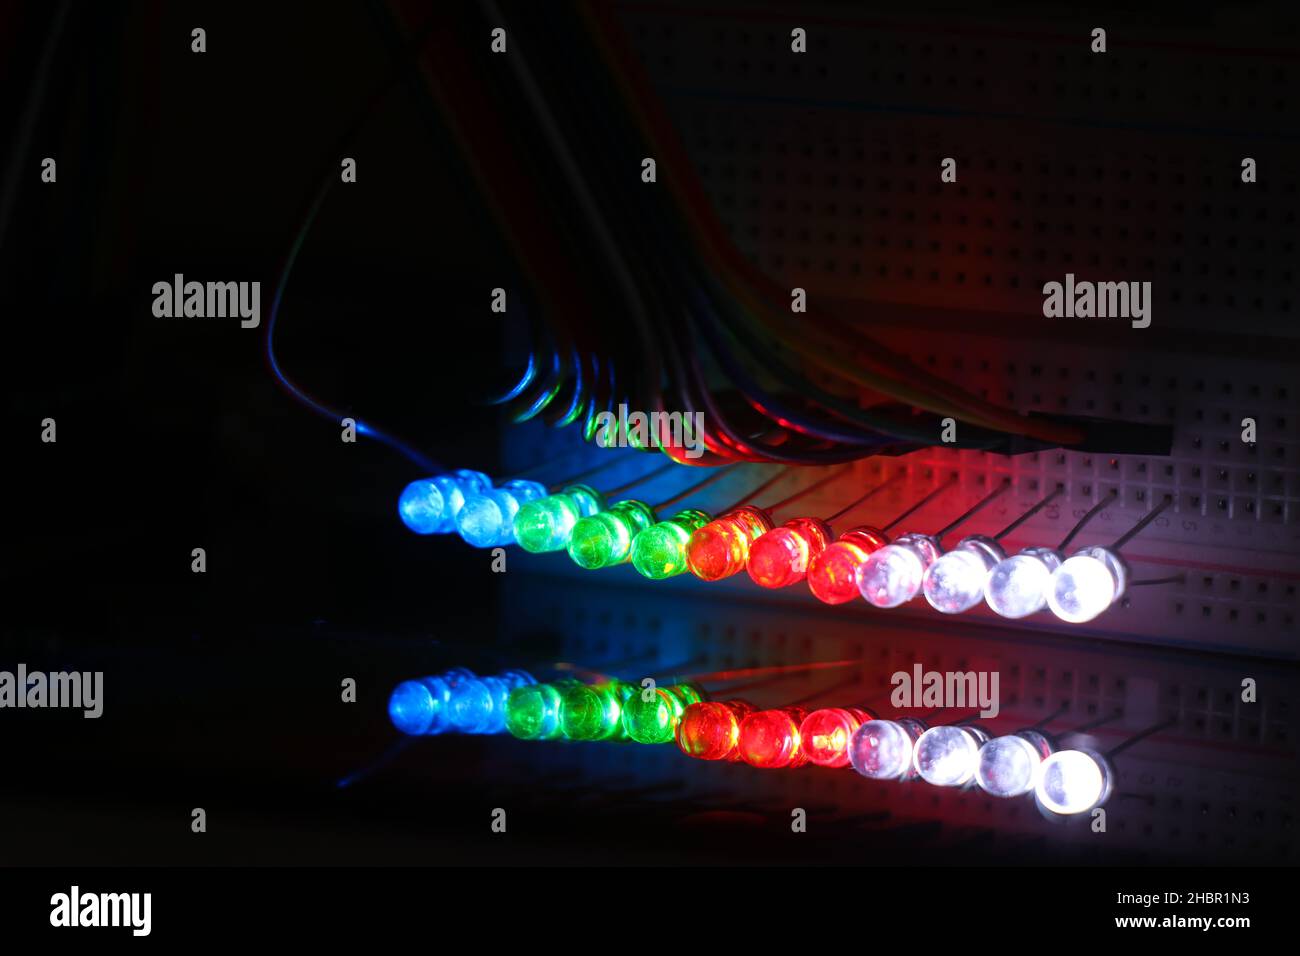 Glowing Light emitting diodes with reflections on the glass, LED bulbs displaying colorful lights Stock Photo